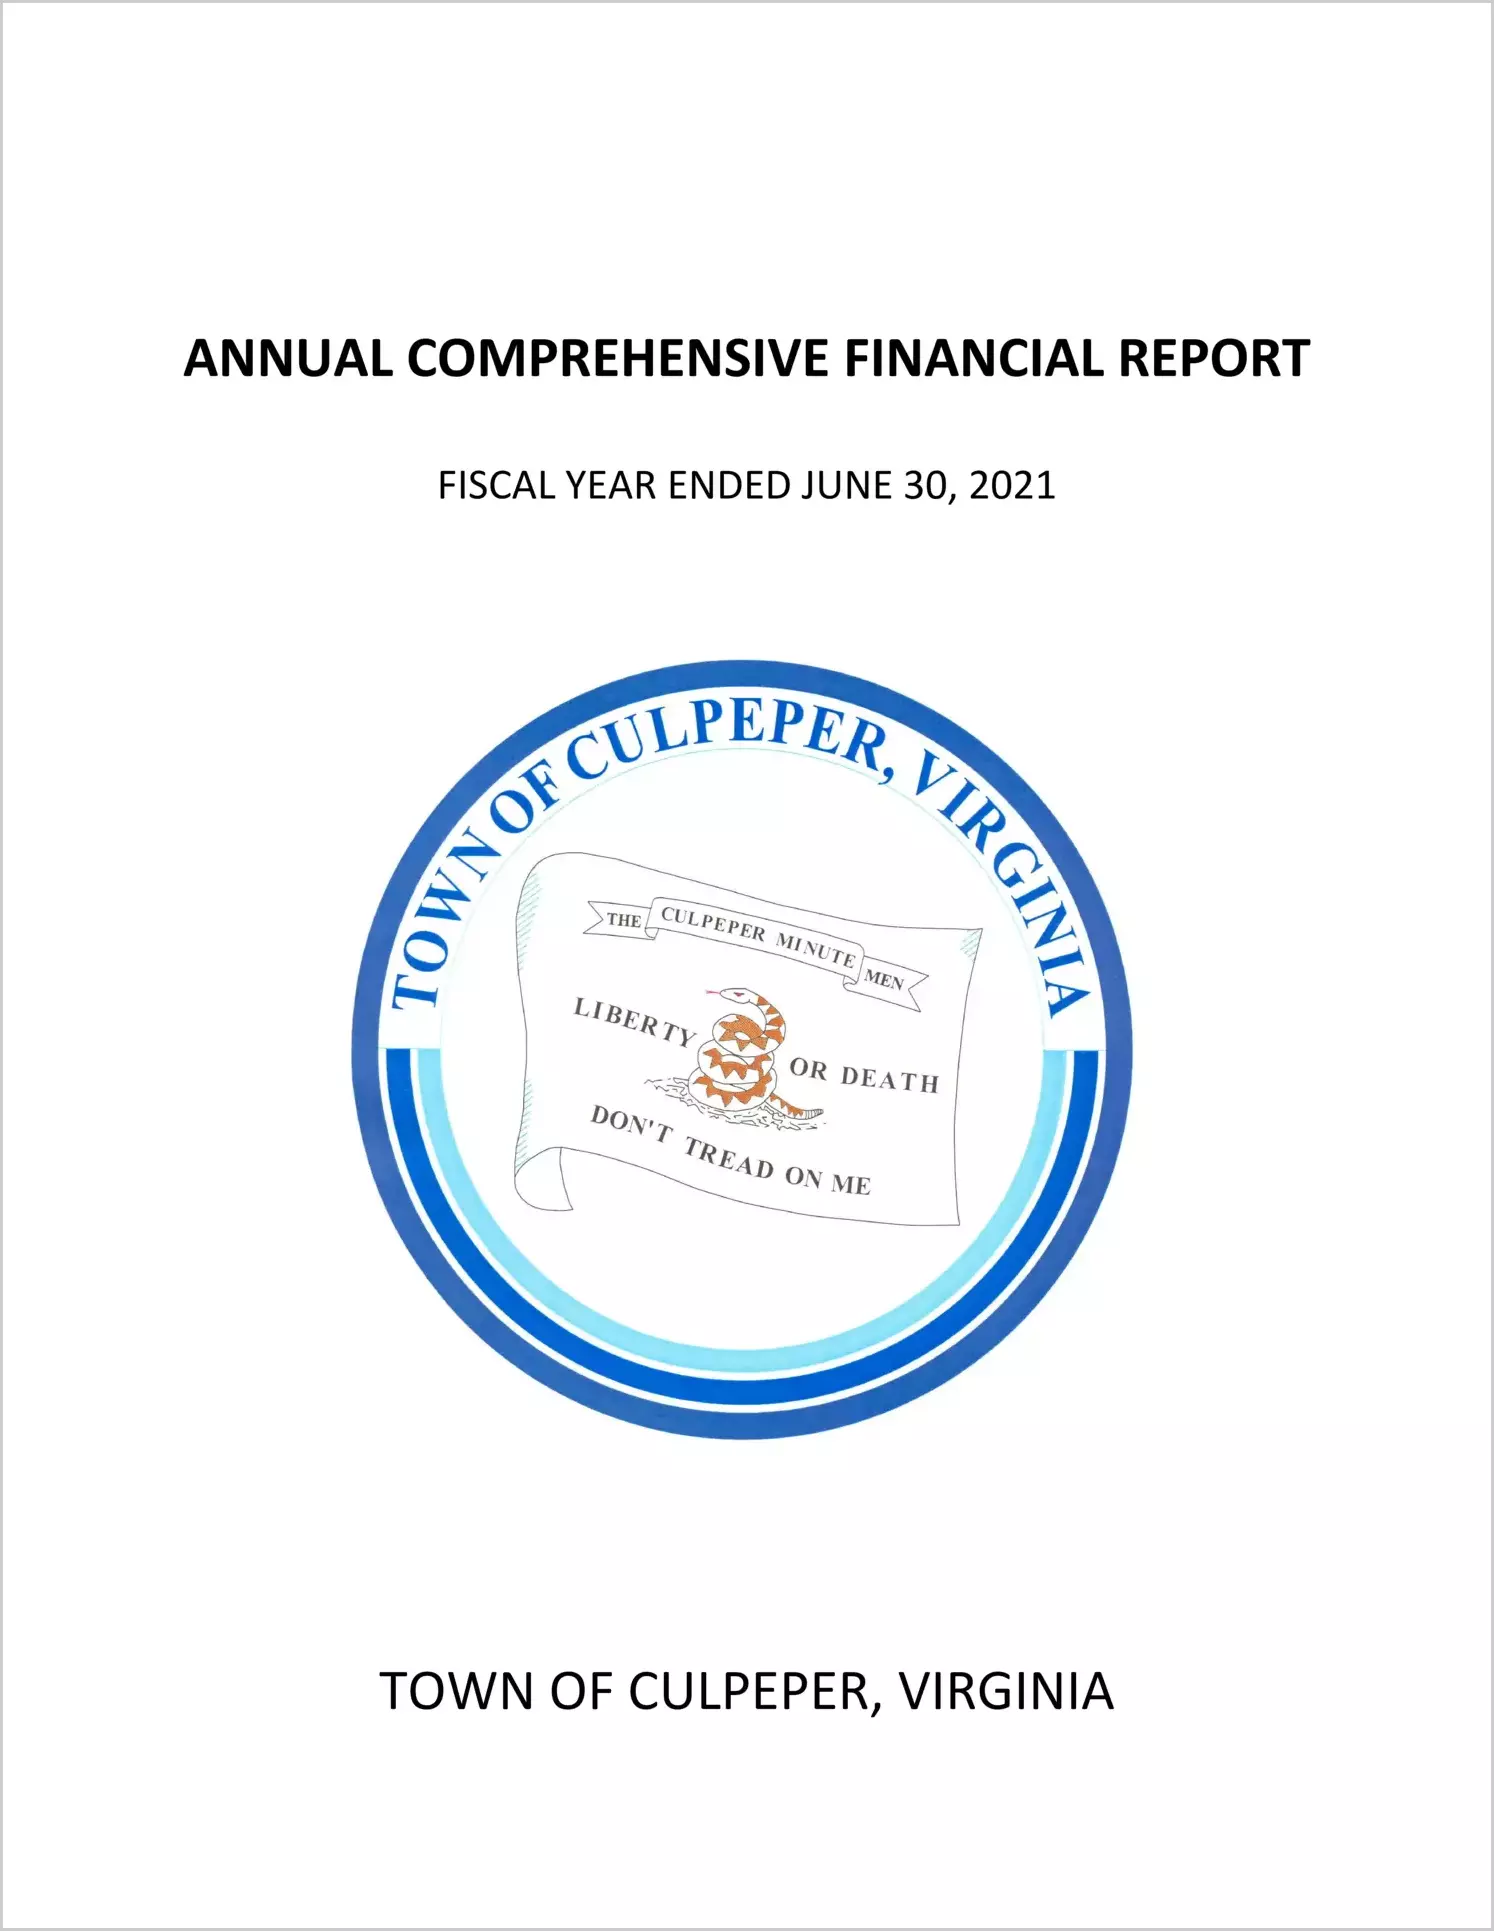 2021 Annual Financial Report for Town of Culpeper